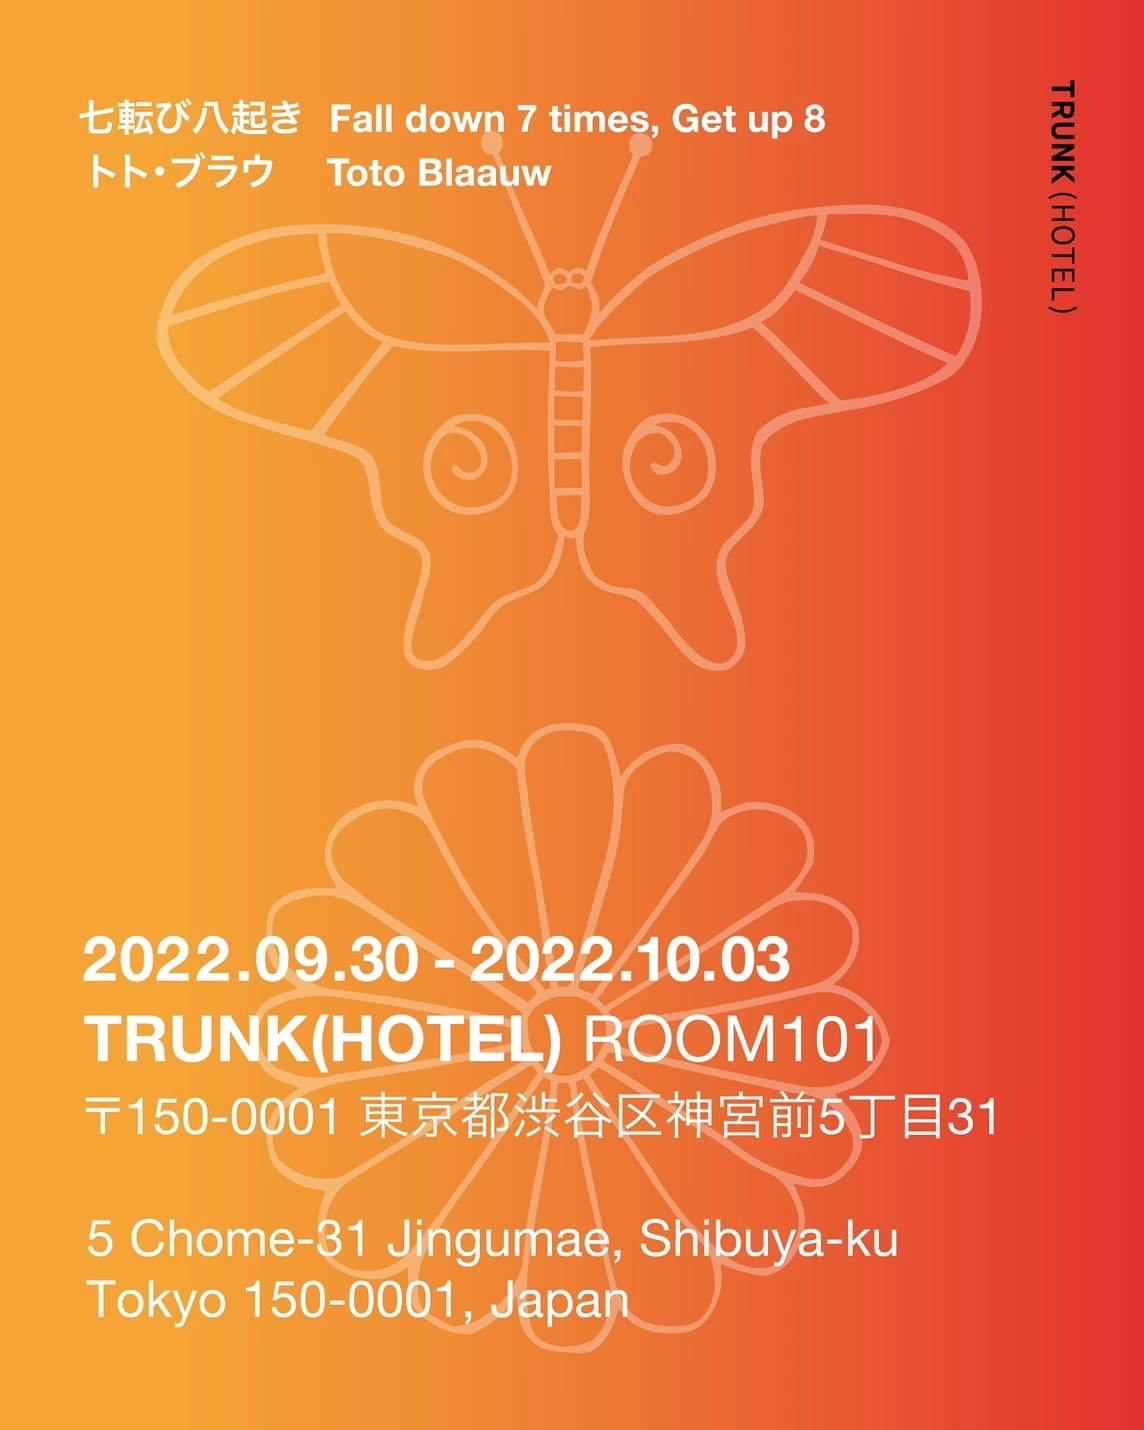 Toto Blaauw Solo Exhibition「Fall down 7 times, Get up 8」 at TRUNK(HOTEL)